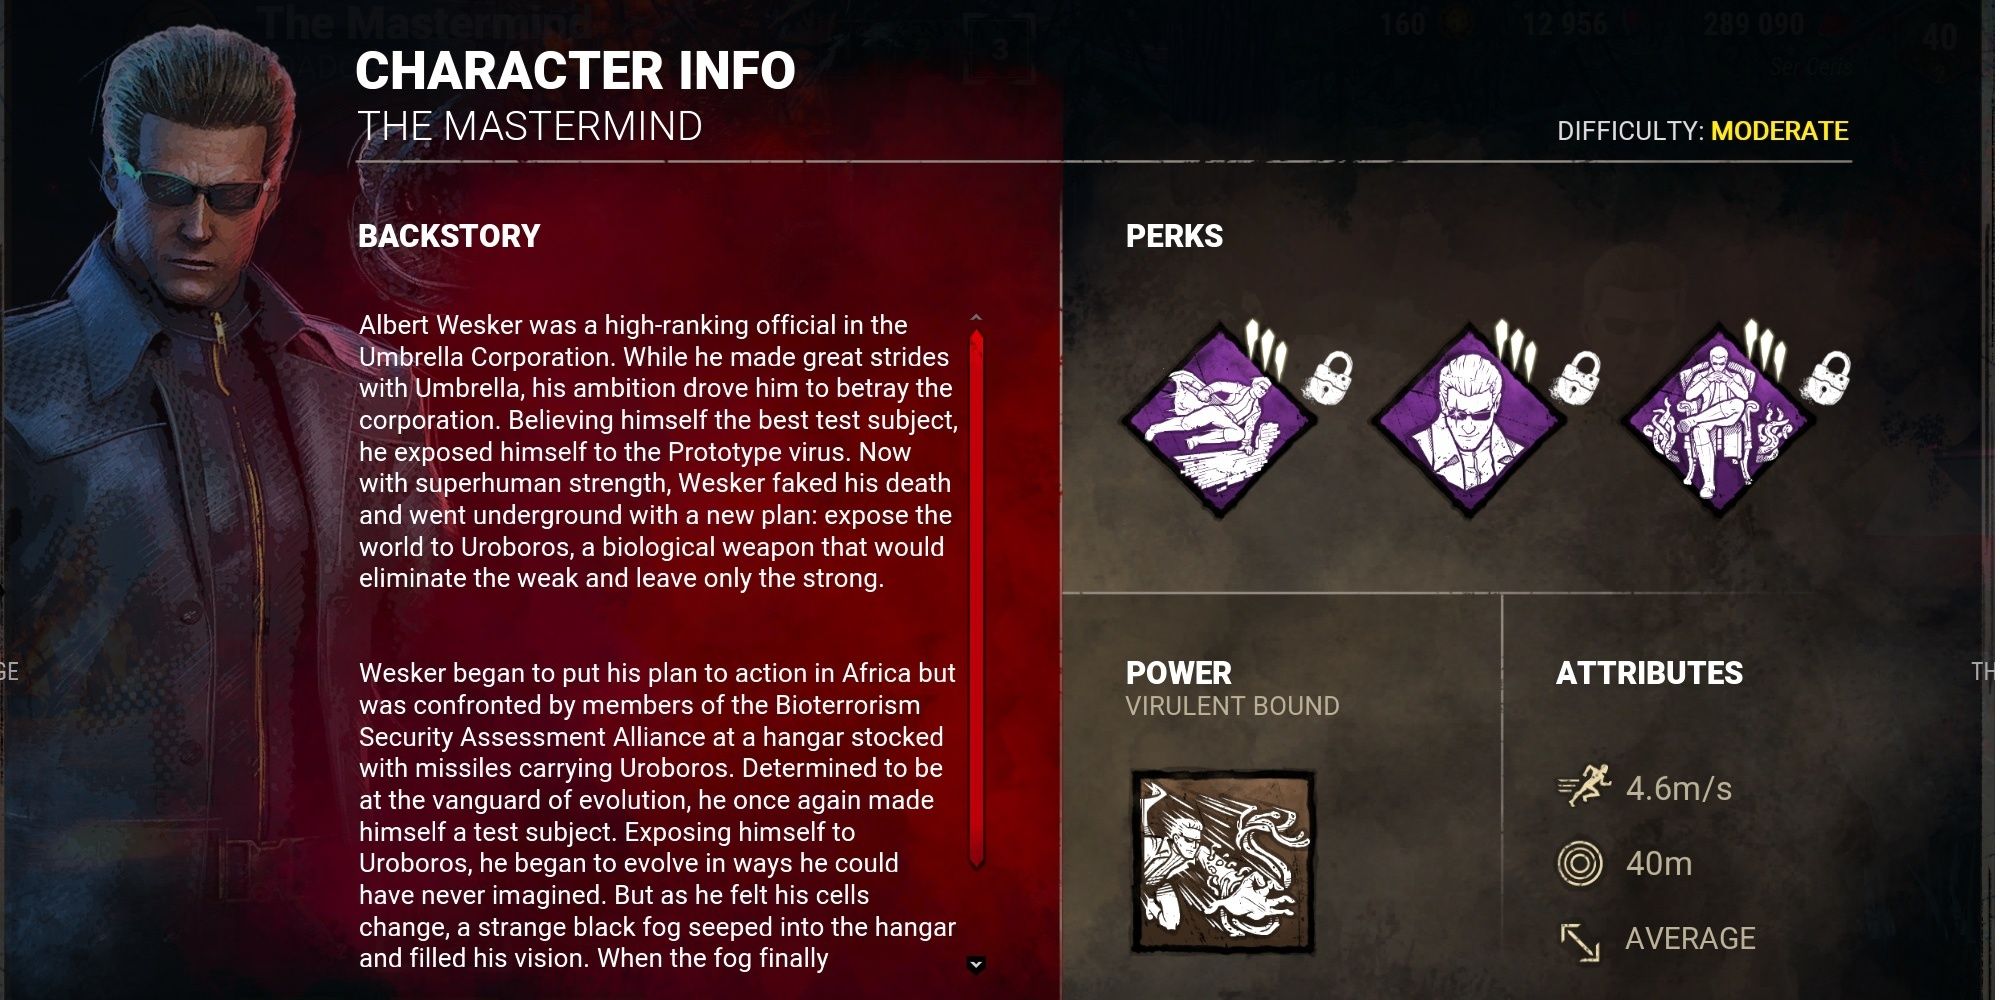 The Mastermind's Killer profile page in Dead By Daylight